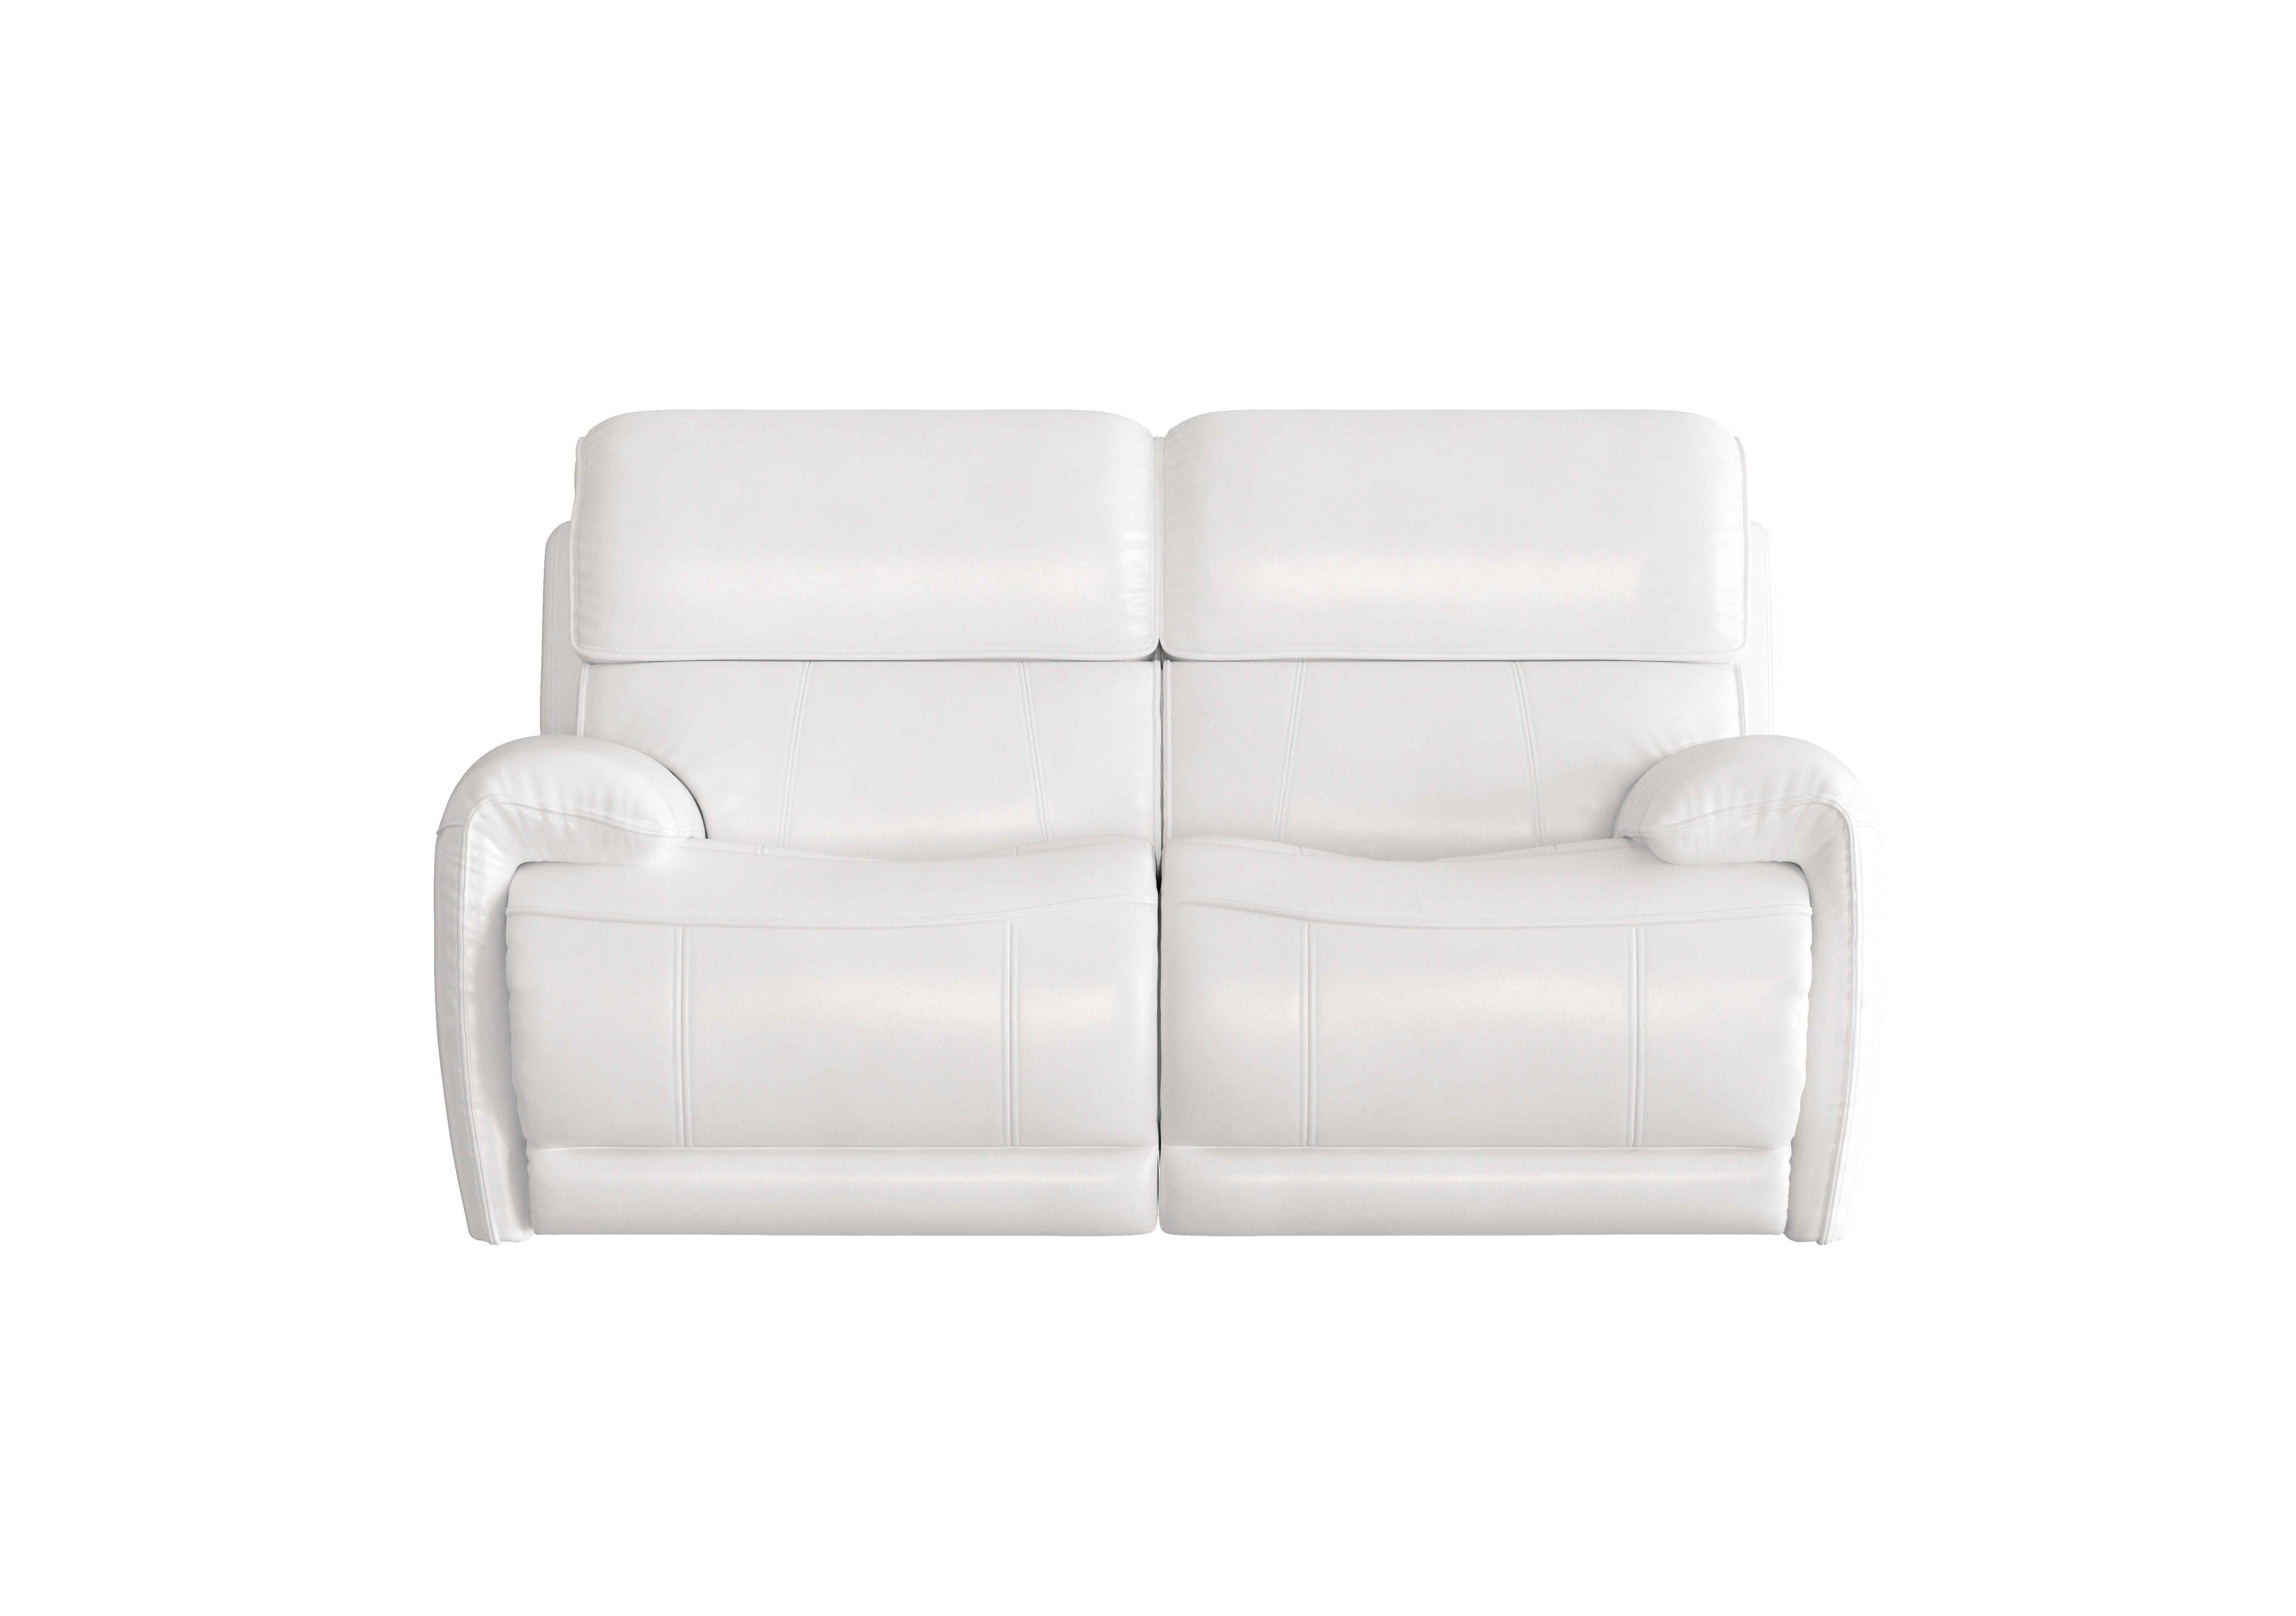 Link 2 Seater Leather Power Recliner Sofa with Power Headrests in Bv-744d Star White on Furniture Village